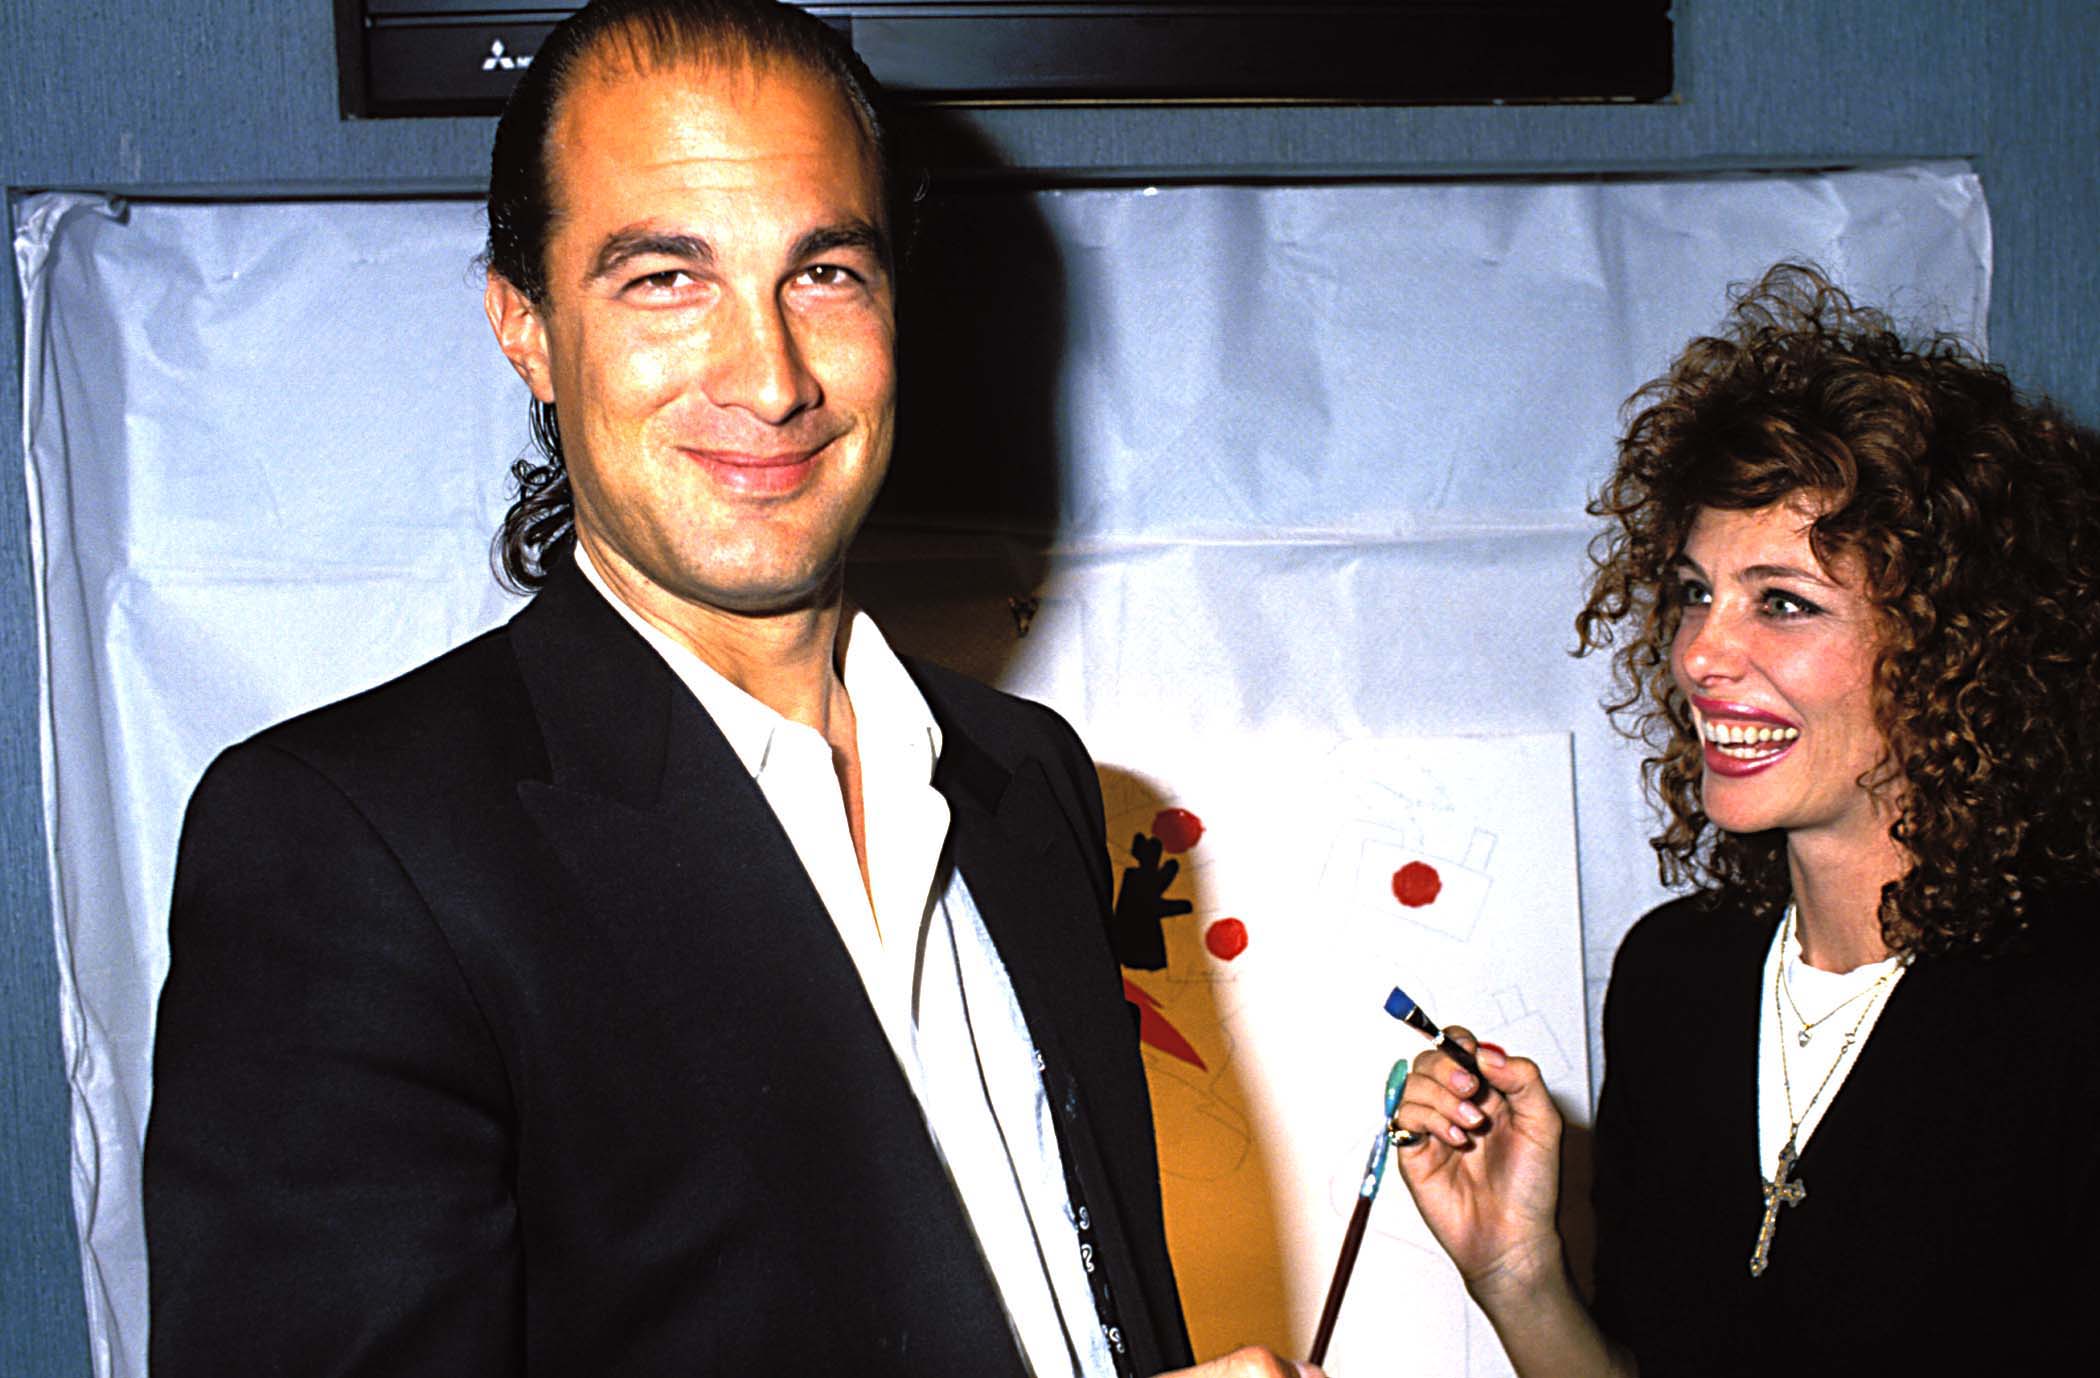 Steven Seagal and Kelly LeBrock during a party for artist Kostabi in Beverly Hills, California. / Source: Getty Images